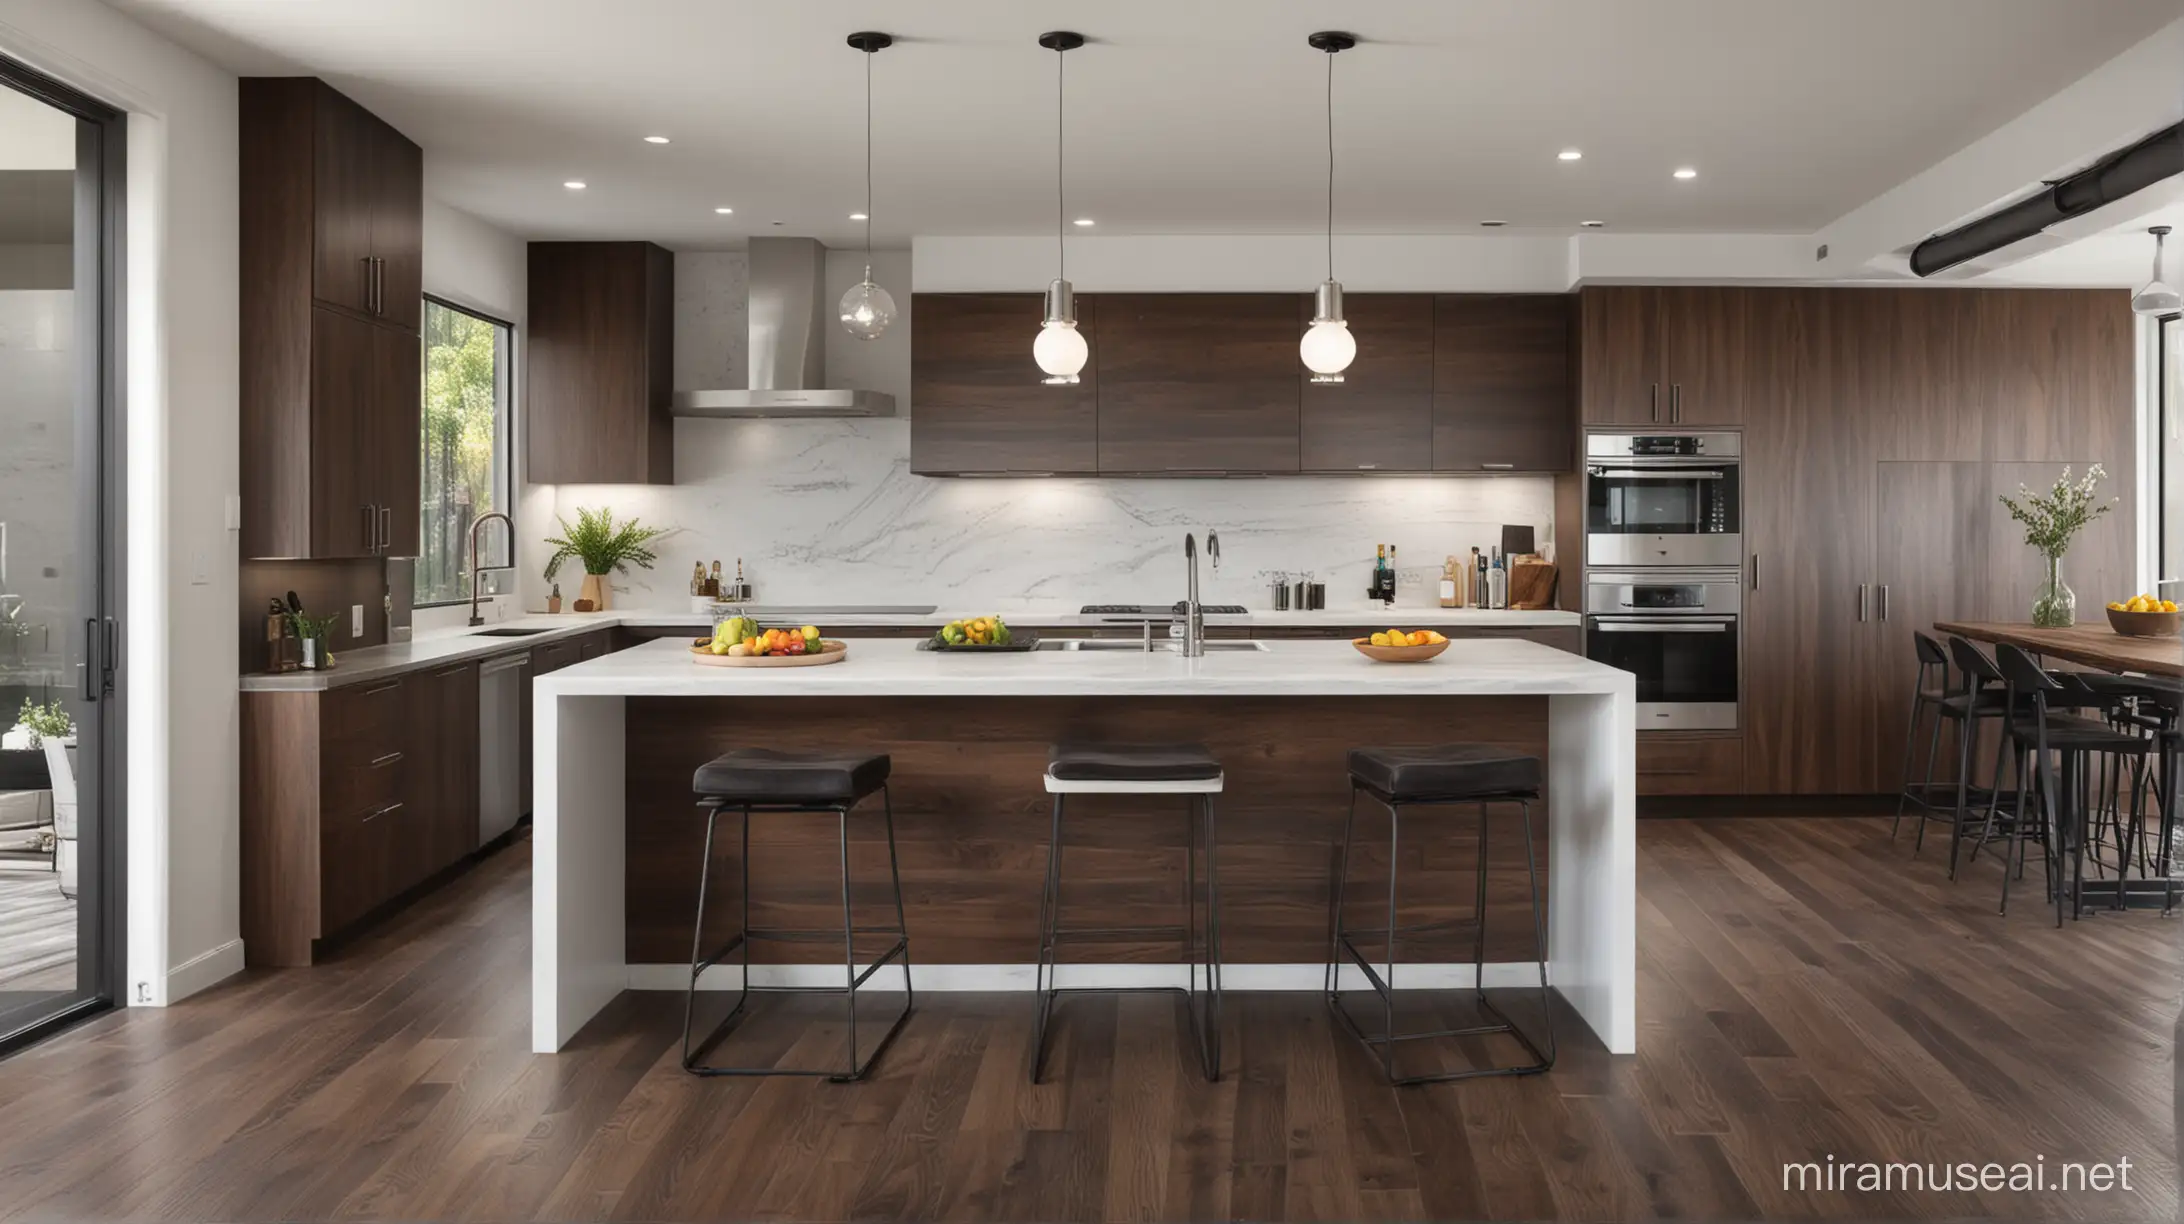 Create a kitchen with dark walnut cabinets, a white countertop, a kitchen island with a white cabinet and a wenge wooden countertop, a concrete dining table with black and white stools. It should be modern and bright, with reclaimed wood floors and white walls.